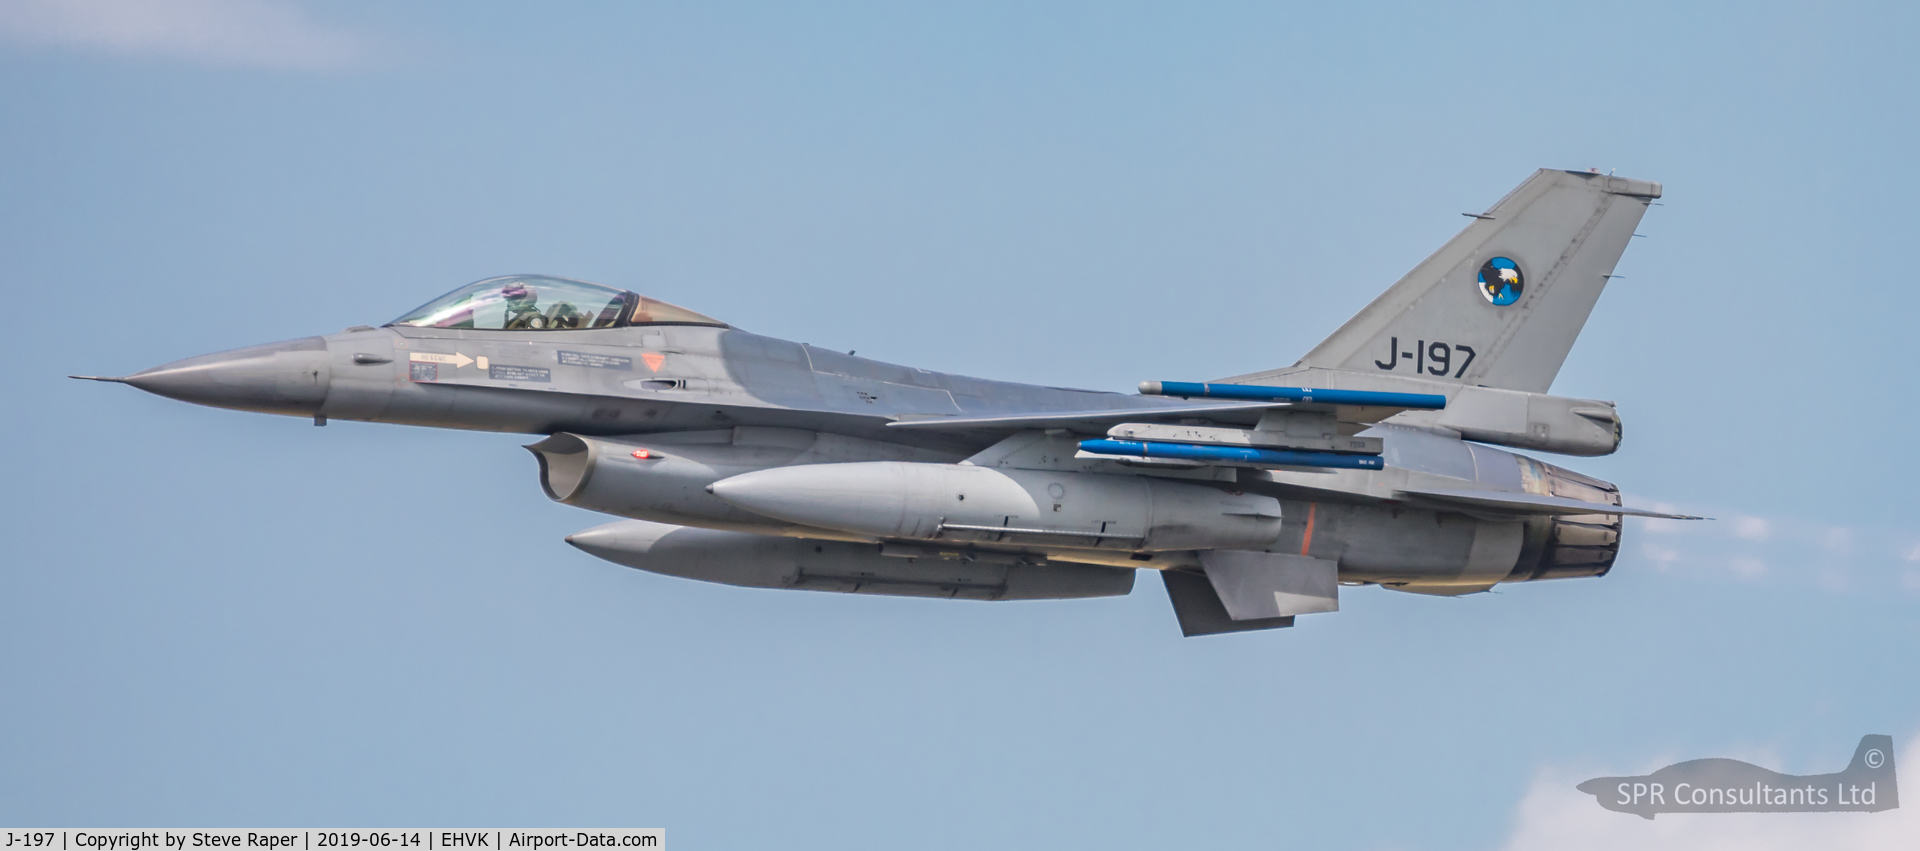 J-197, Fokker F-16AM Fighting Falcon C/N 6D-104, Royal Netherlands Air Force Base Volkel air day 14 June 2019